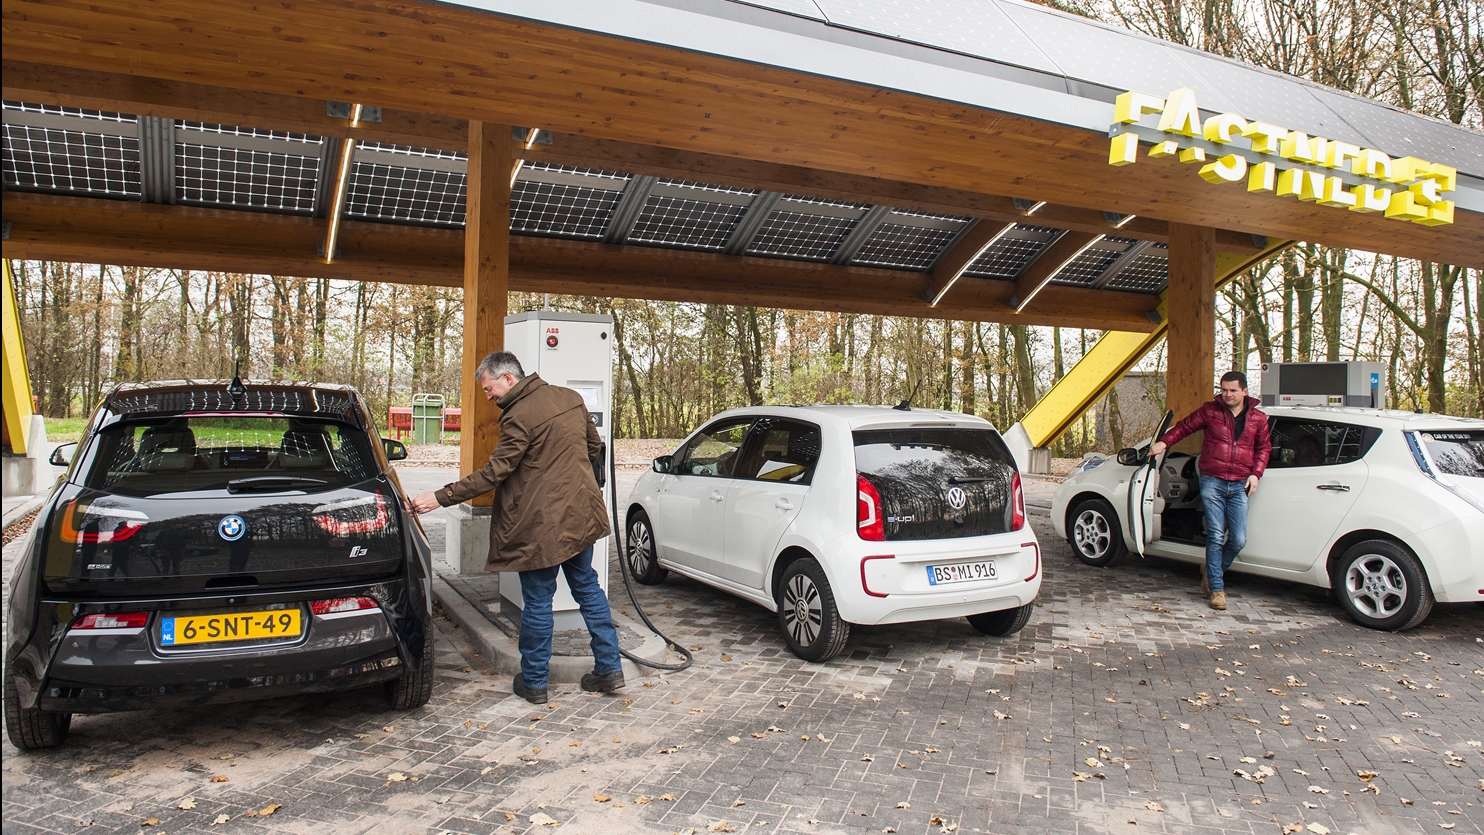 Rapid charging point for electric cars, with solar panels.